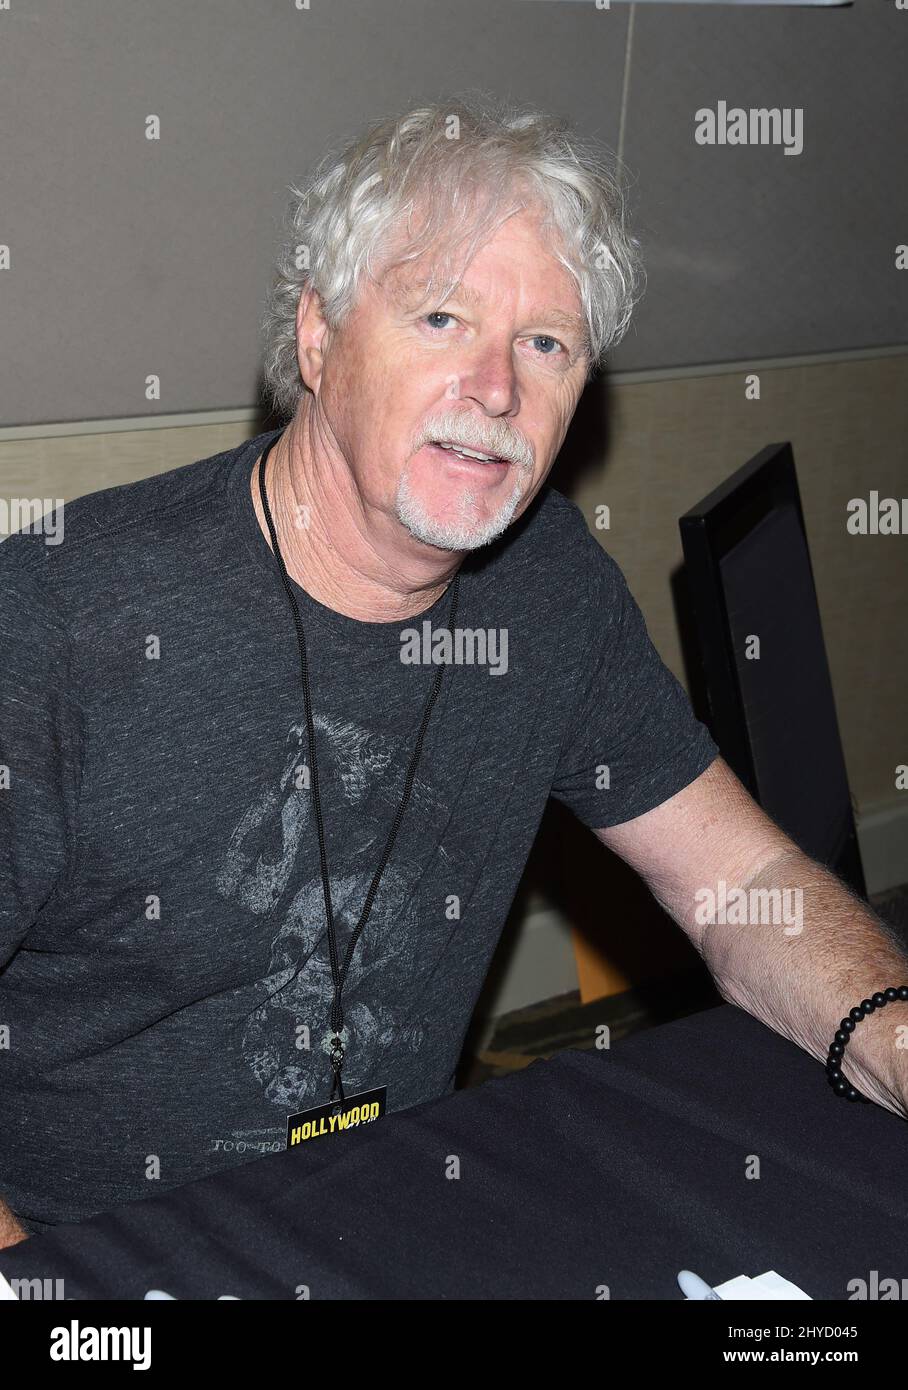 William Katt attending The Hollywood Show held at the Westin LAX Hotel Stock Photo